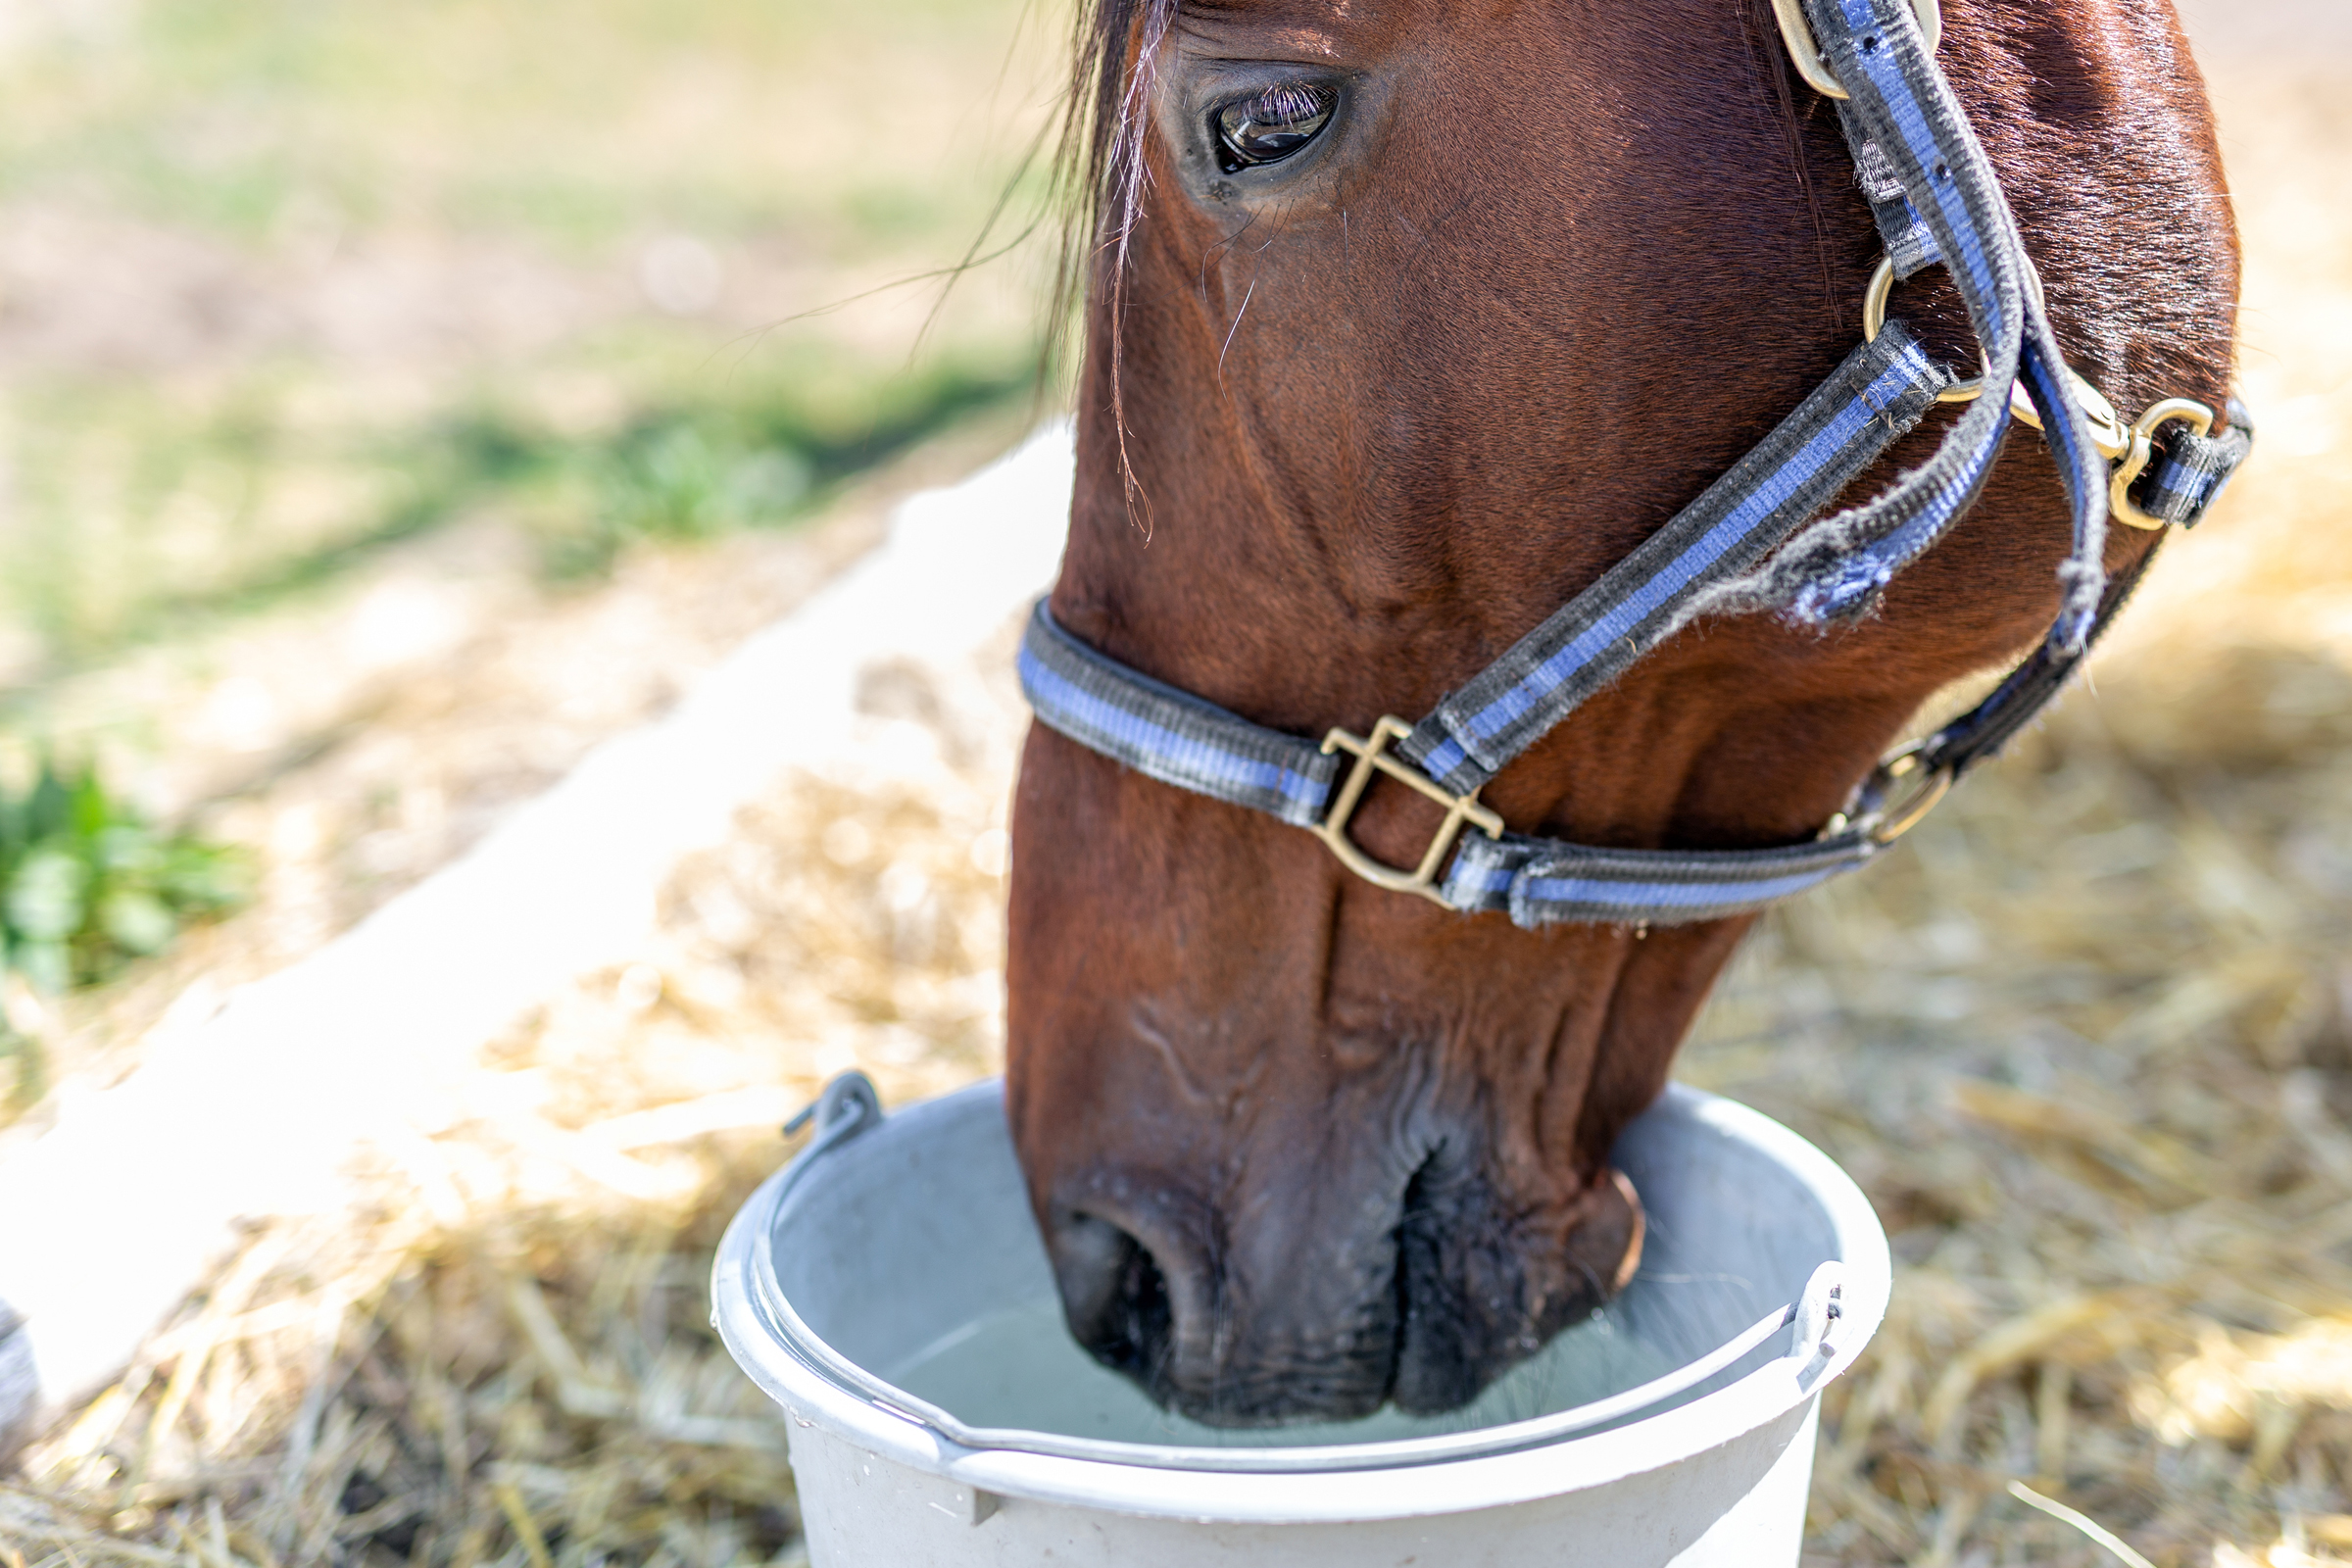 Beautiful Brown Thoroughbred Horse Drinking Water From Bucket. Thirst During Hot Summer Day. Thirsty Animal At Farm